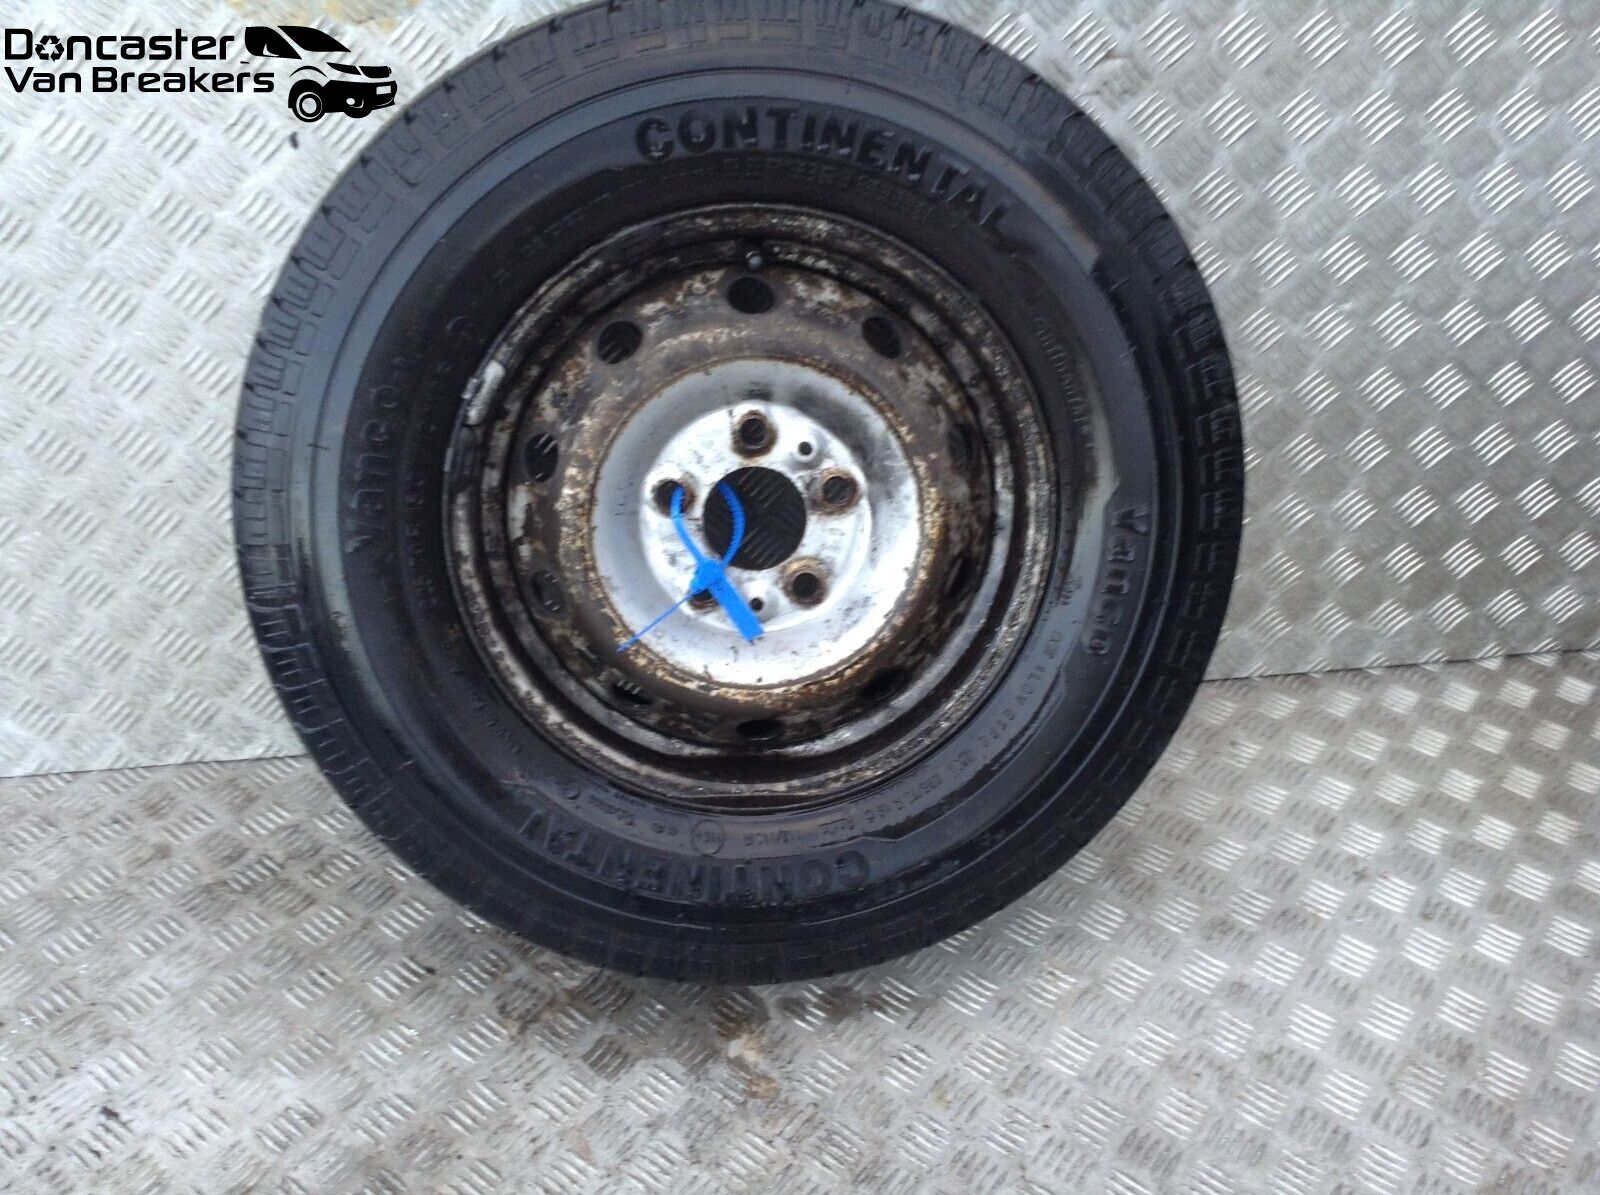 IVECO DAILY 35512 2005 STEEL WHEEL AND TYRE 225/17/R15C CONTINENTAL TYRE